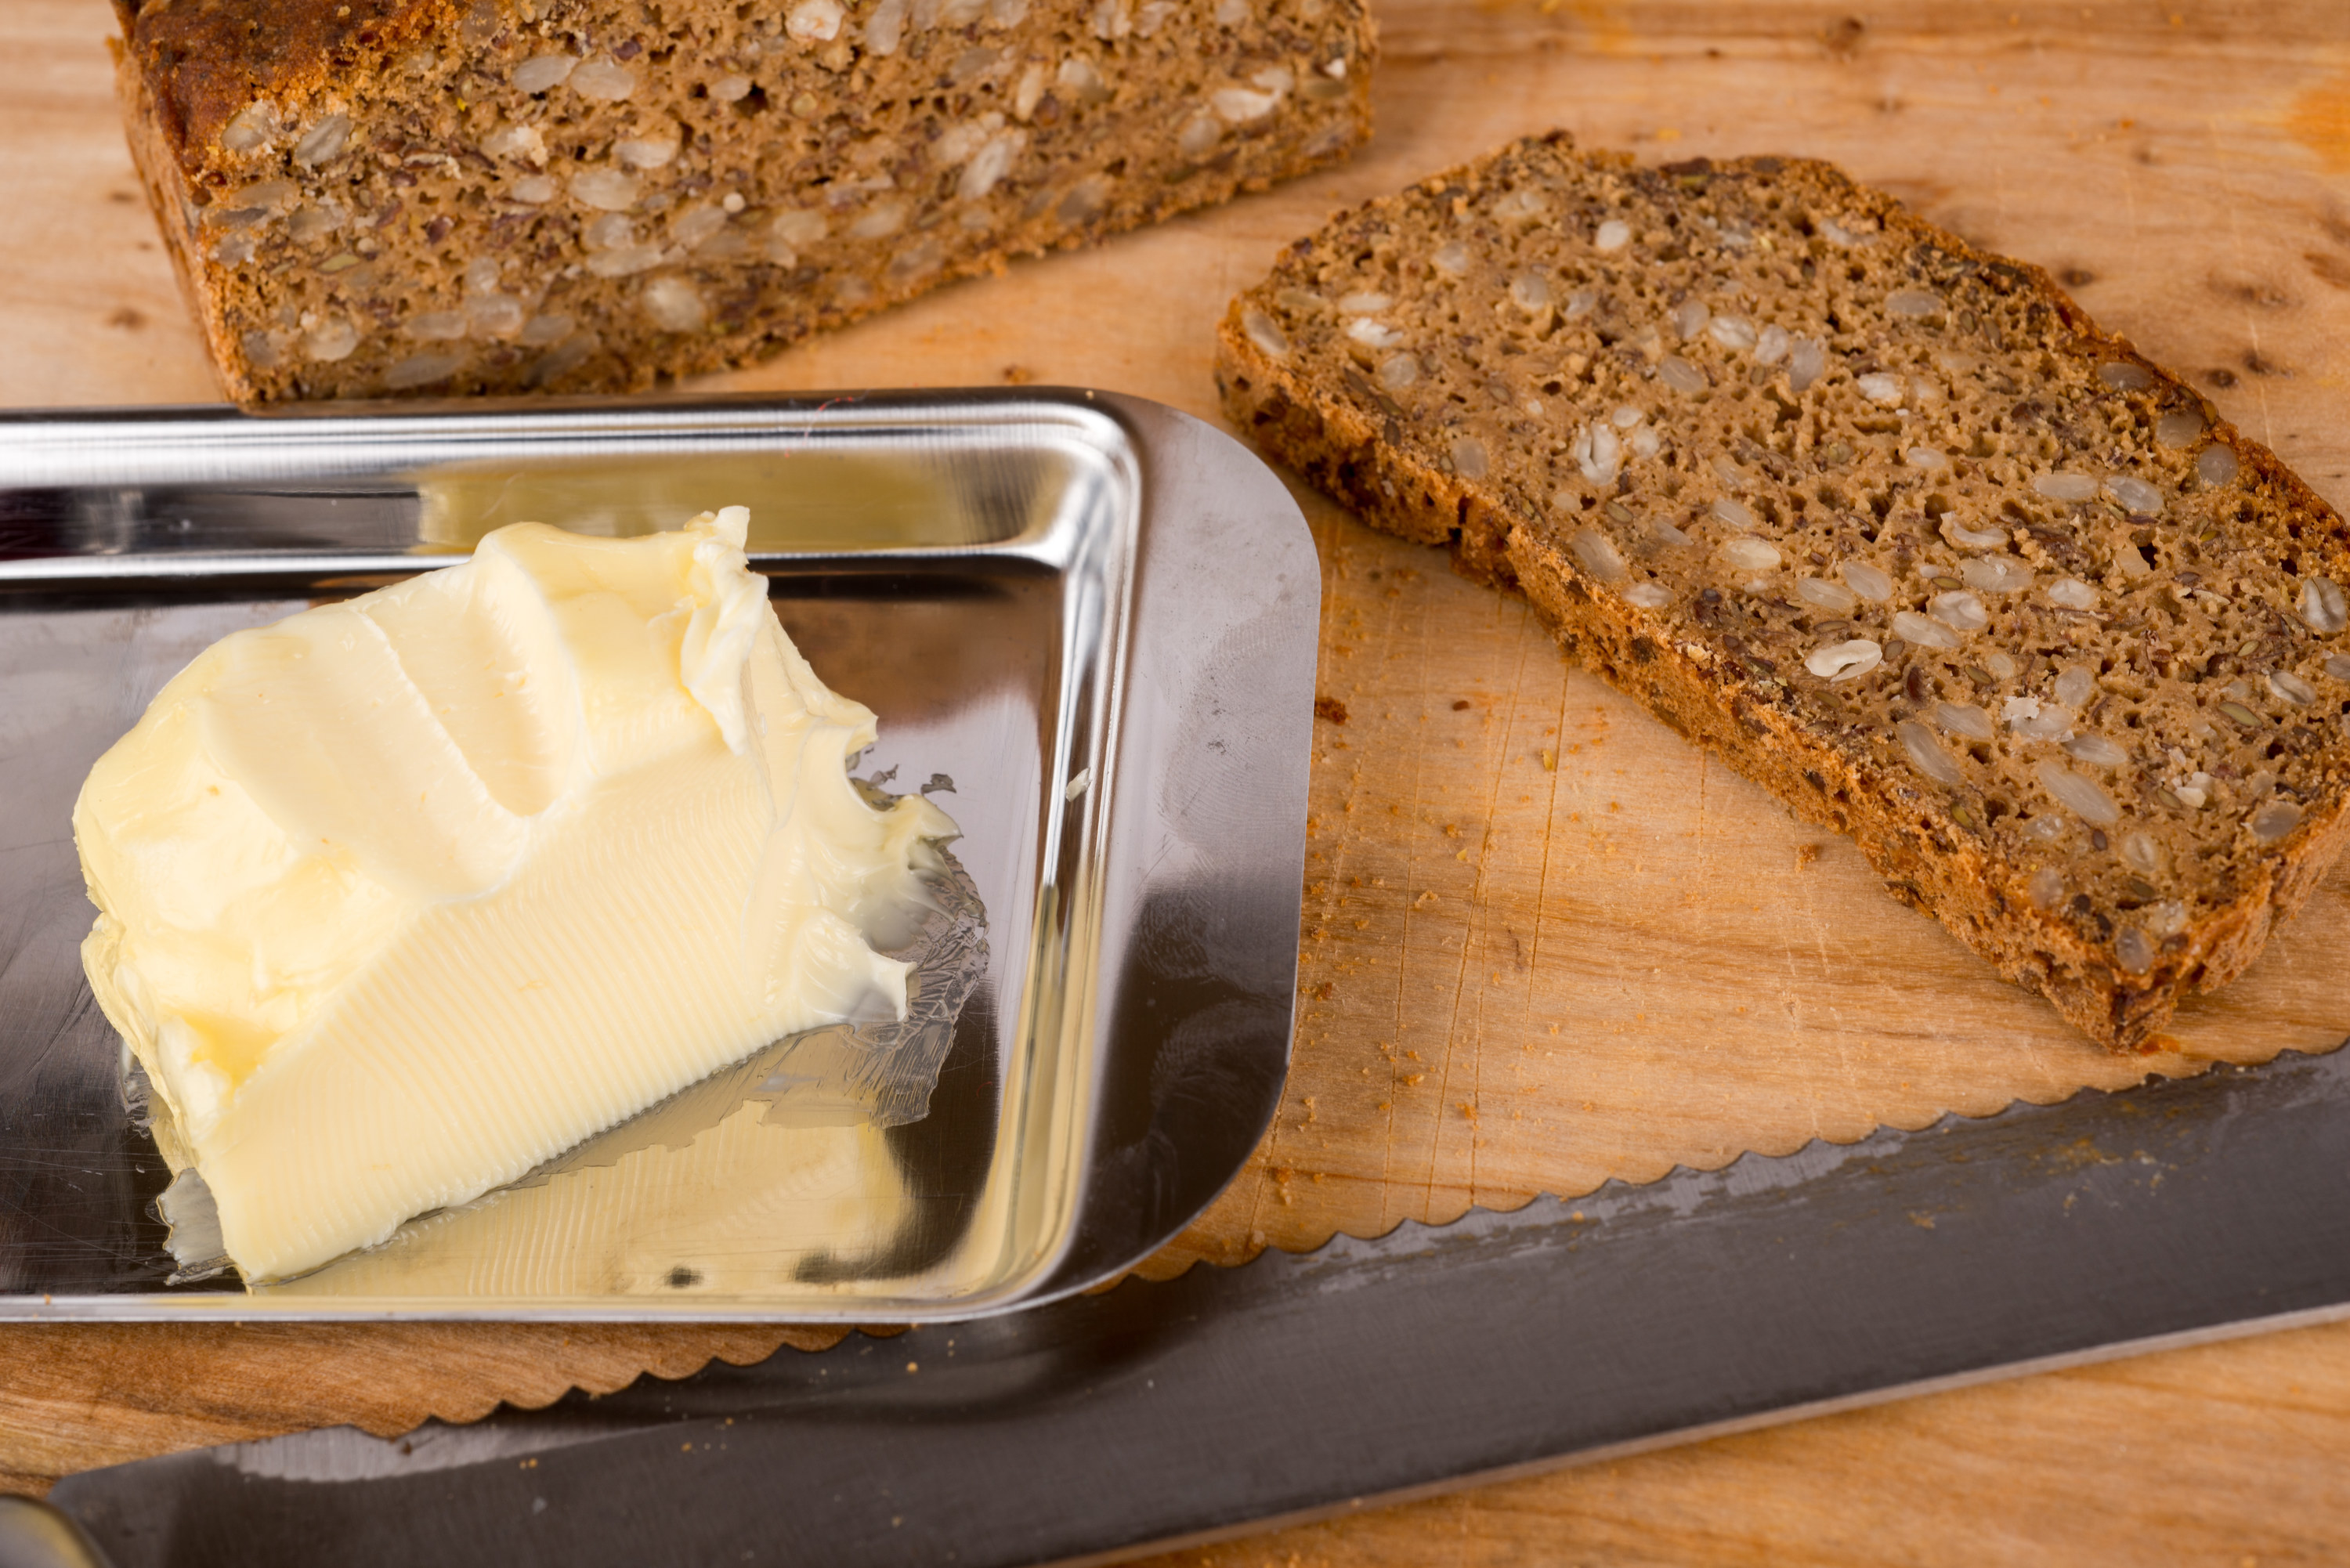 Room temperature butter in a dish next to a slice of bread